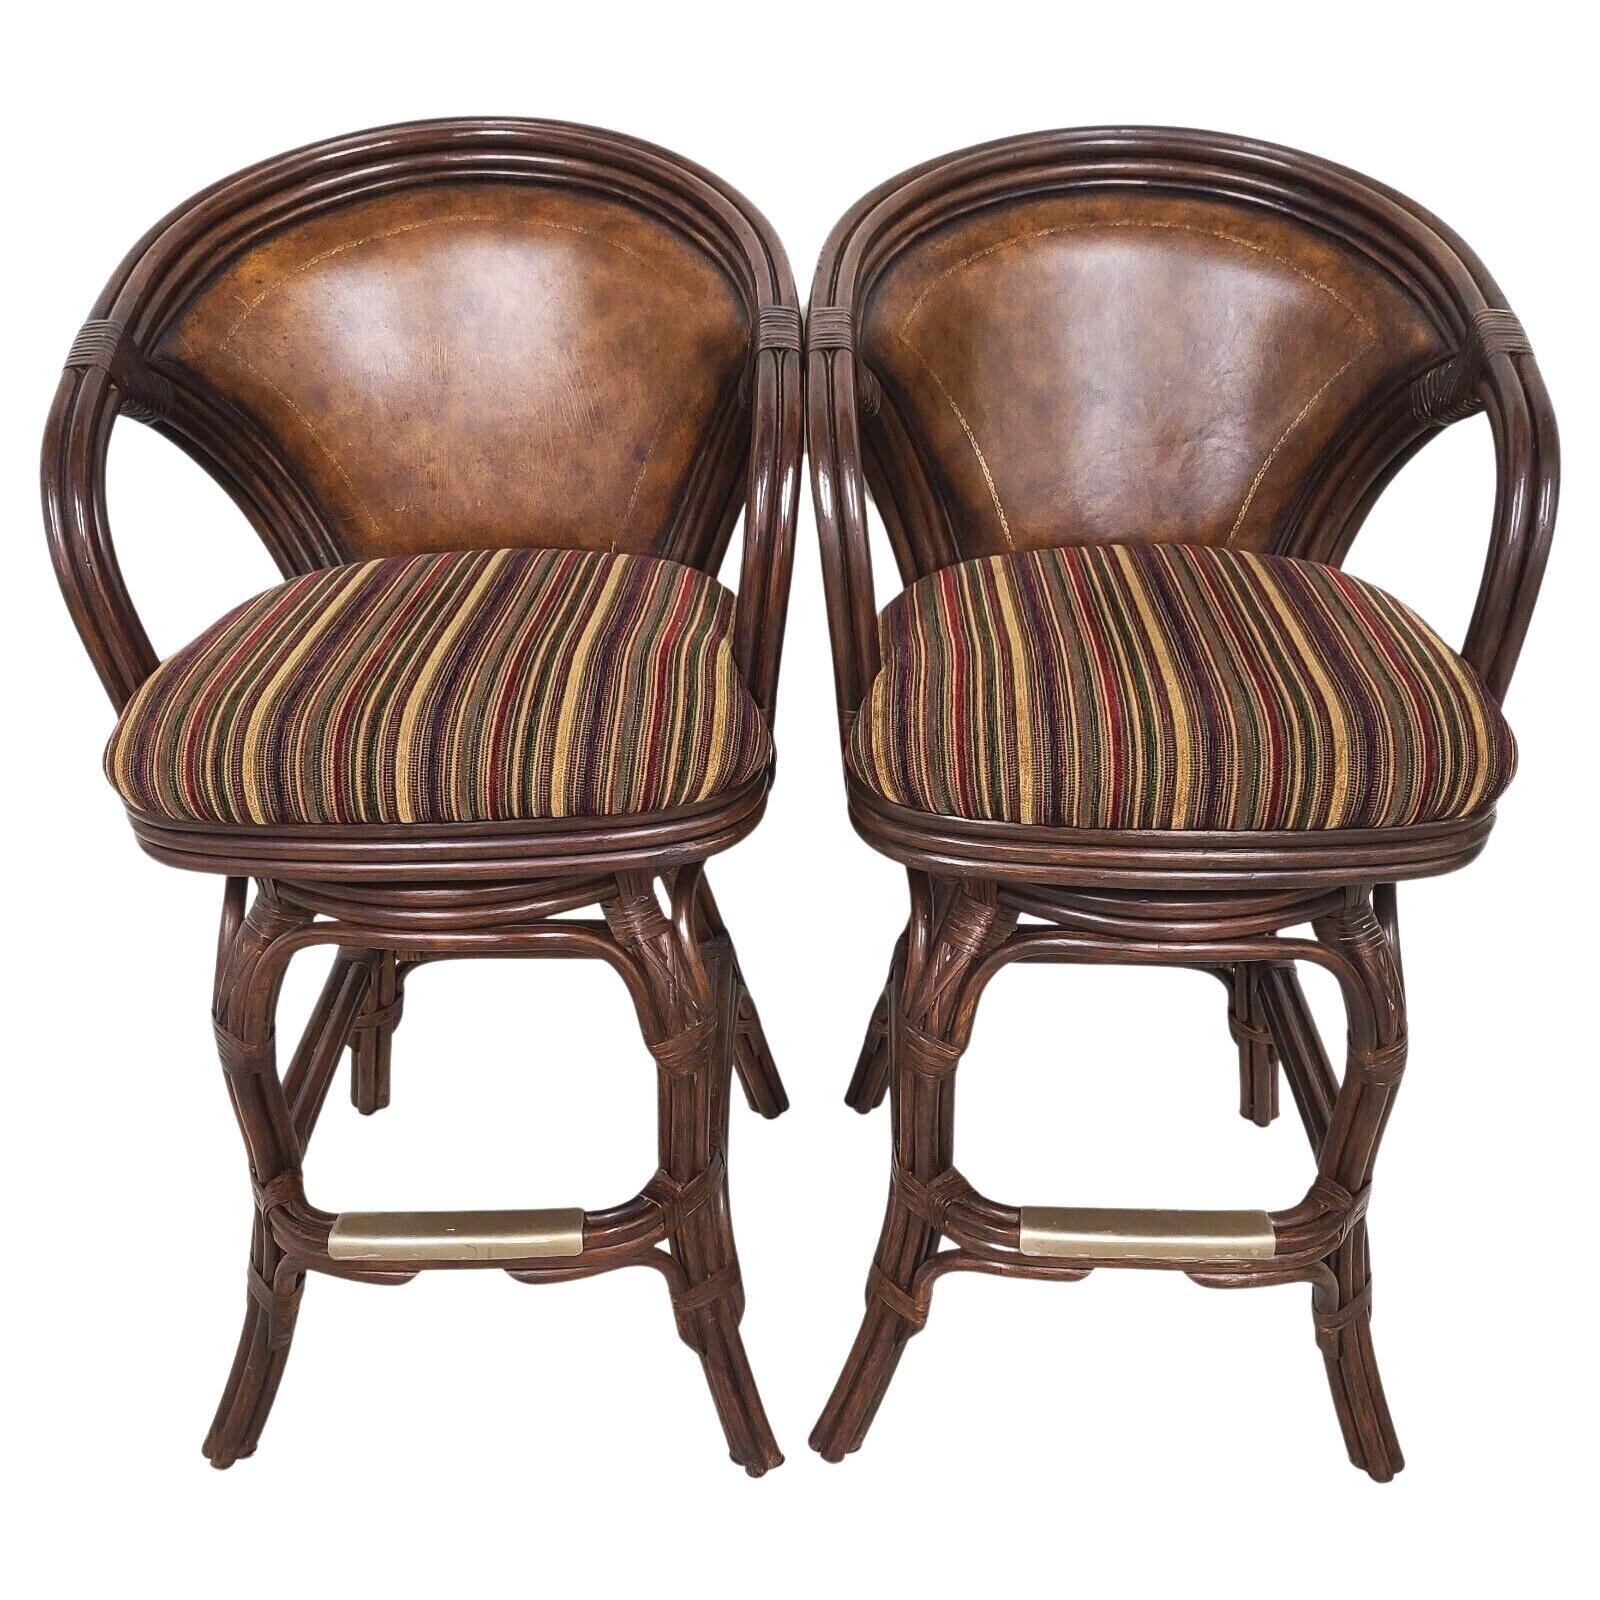 Bamboo Rattan Leather Swivel Barstools by Hooker